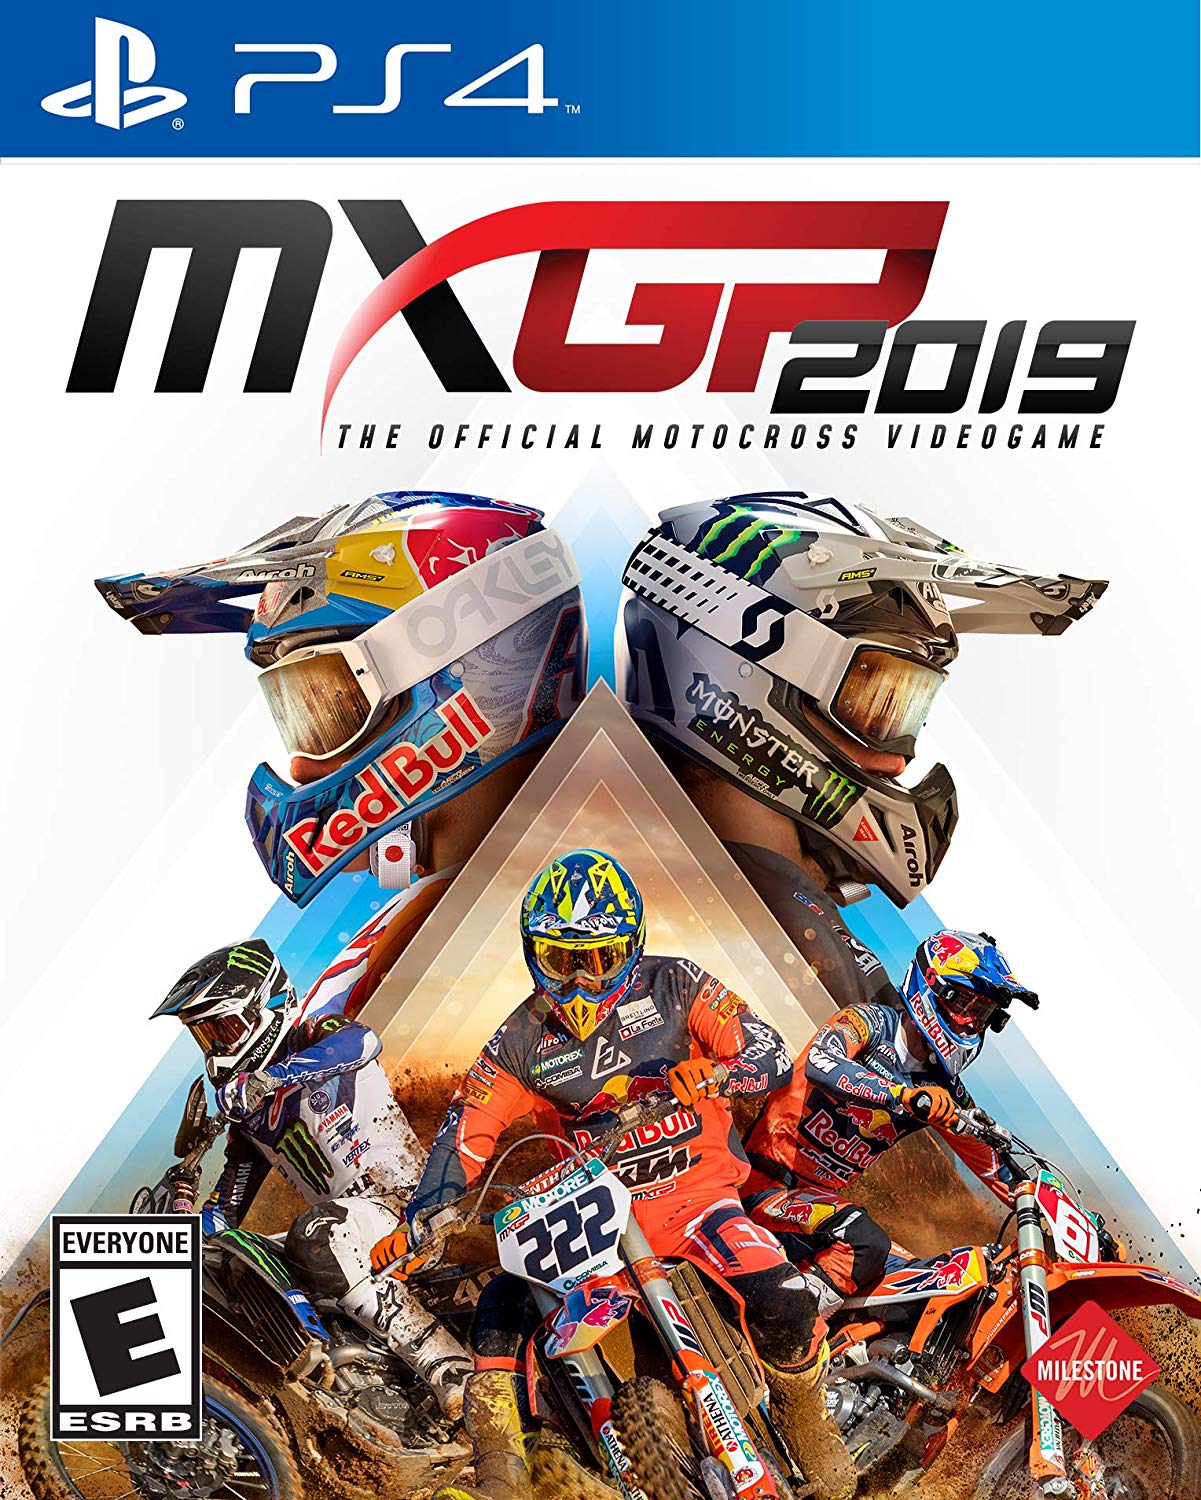 MXGP 2019 The Official Motorcross Video Game (PS4) - PlayStation 4 Video Games Maximum Games   